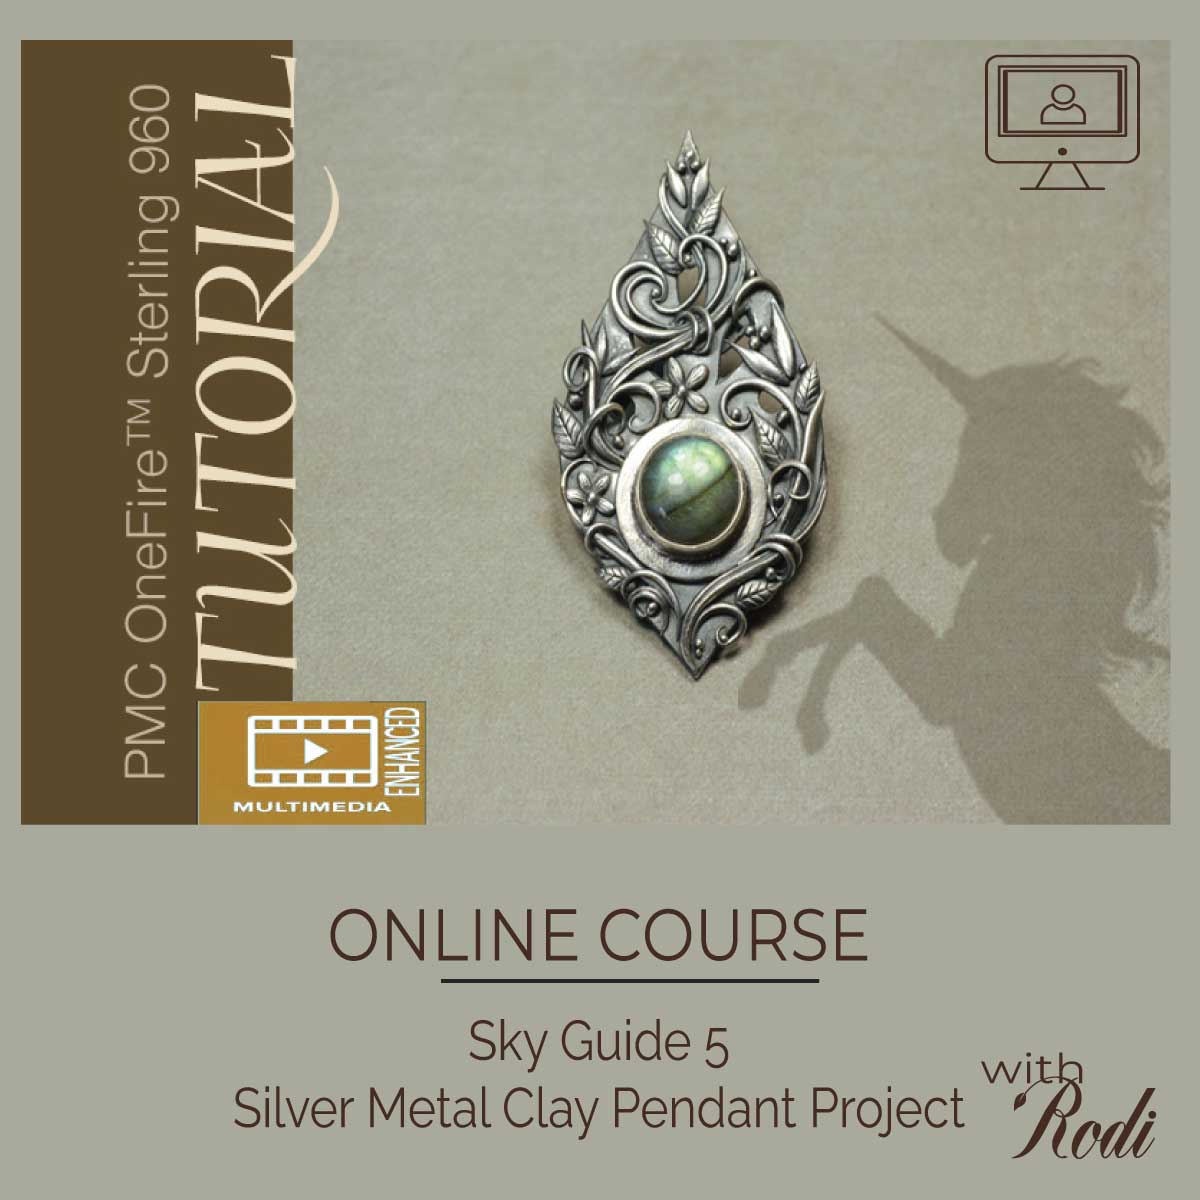 Sky Guide 5 - Metal Clay Pendant Project Online Course